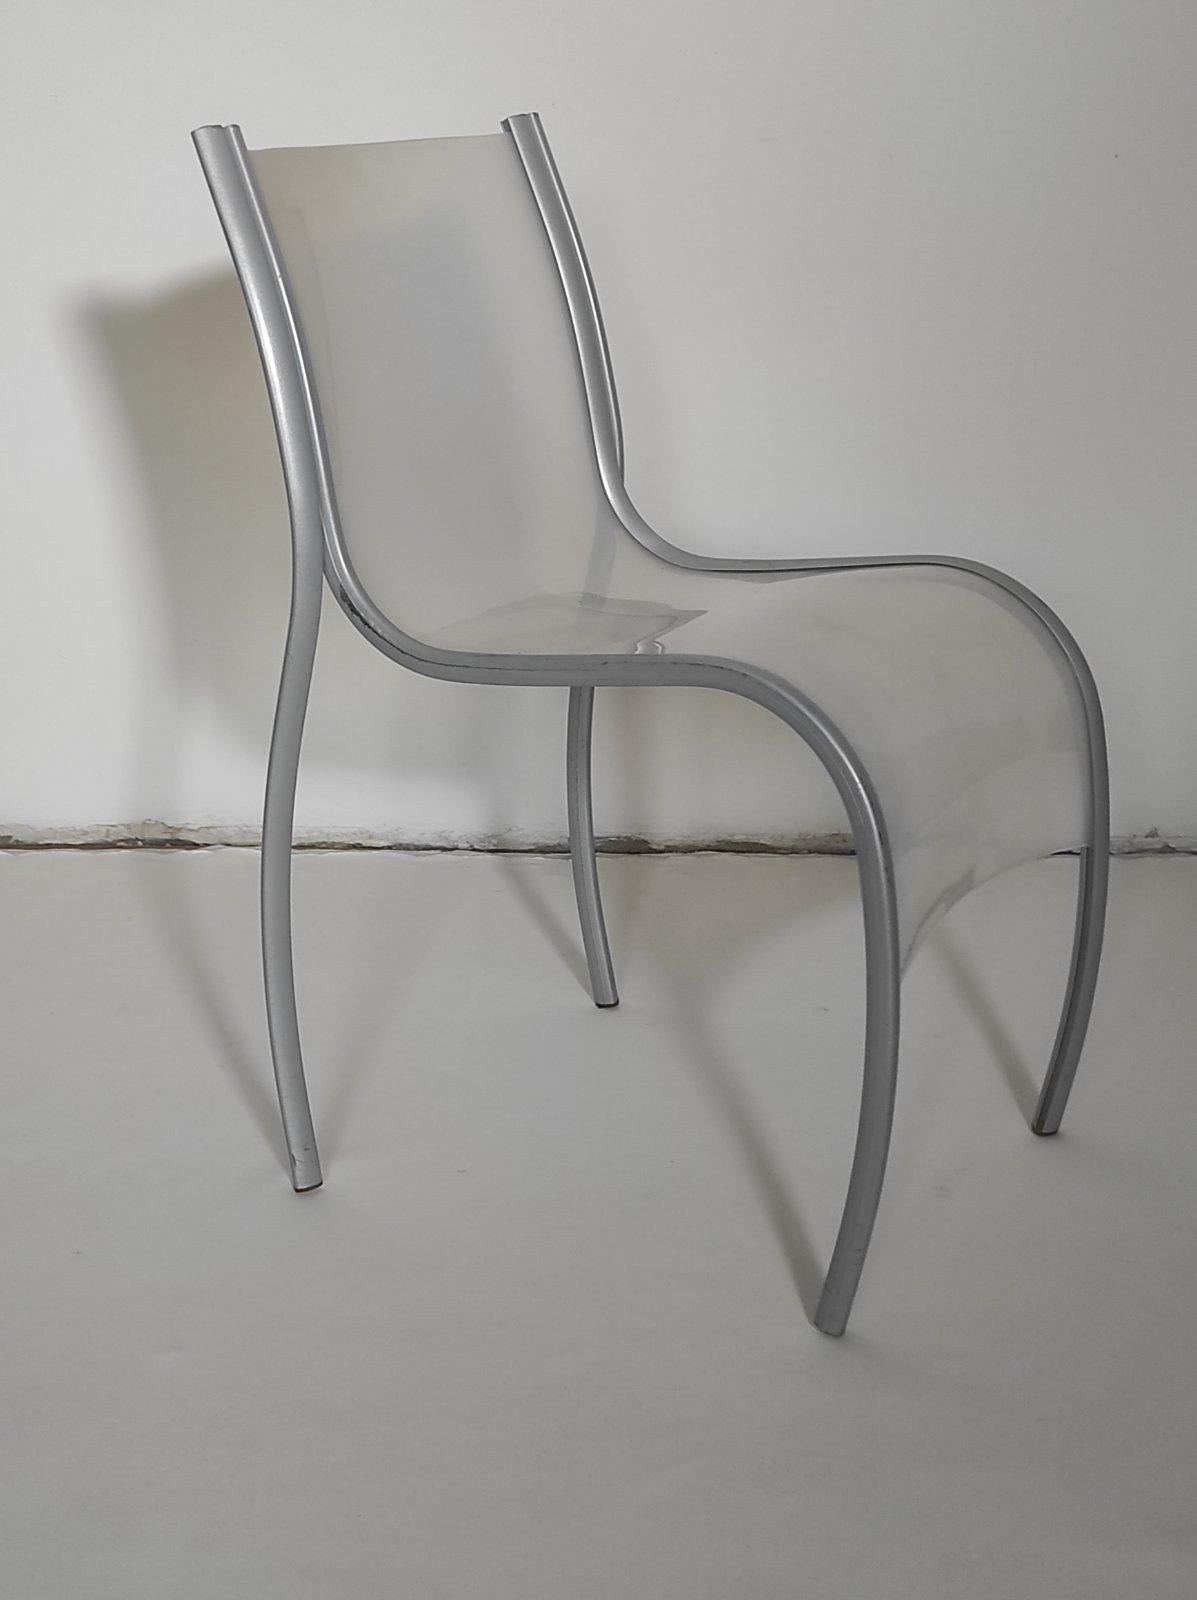 Ron Arad chair for Kartell 1980s